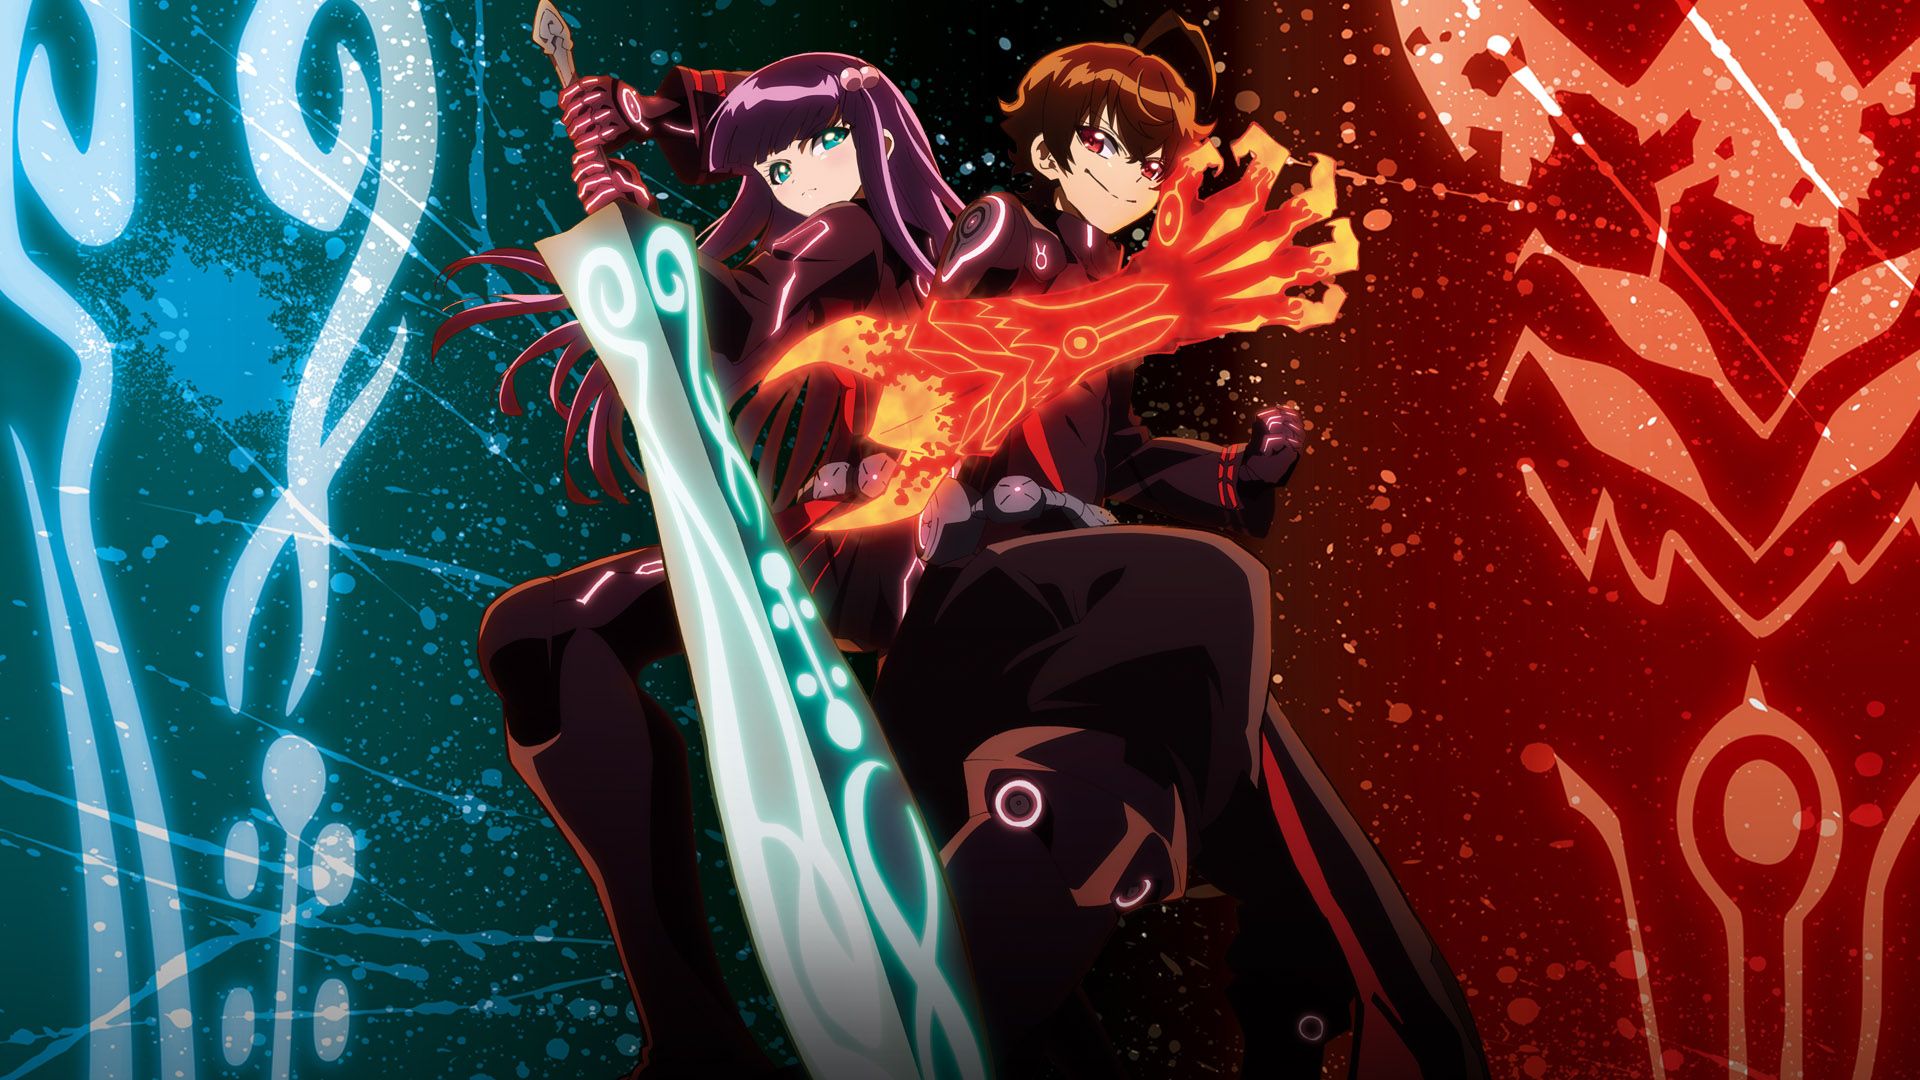 Twin Star Exorcists background